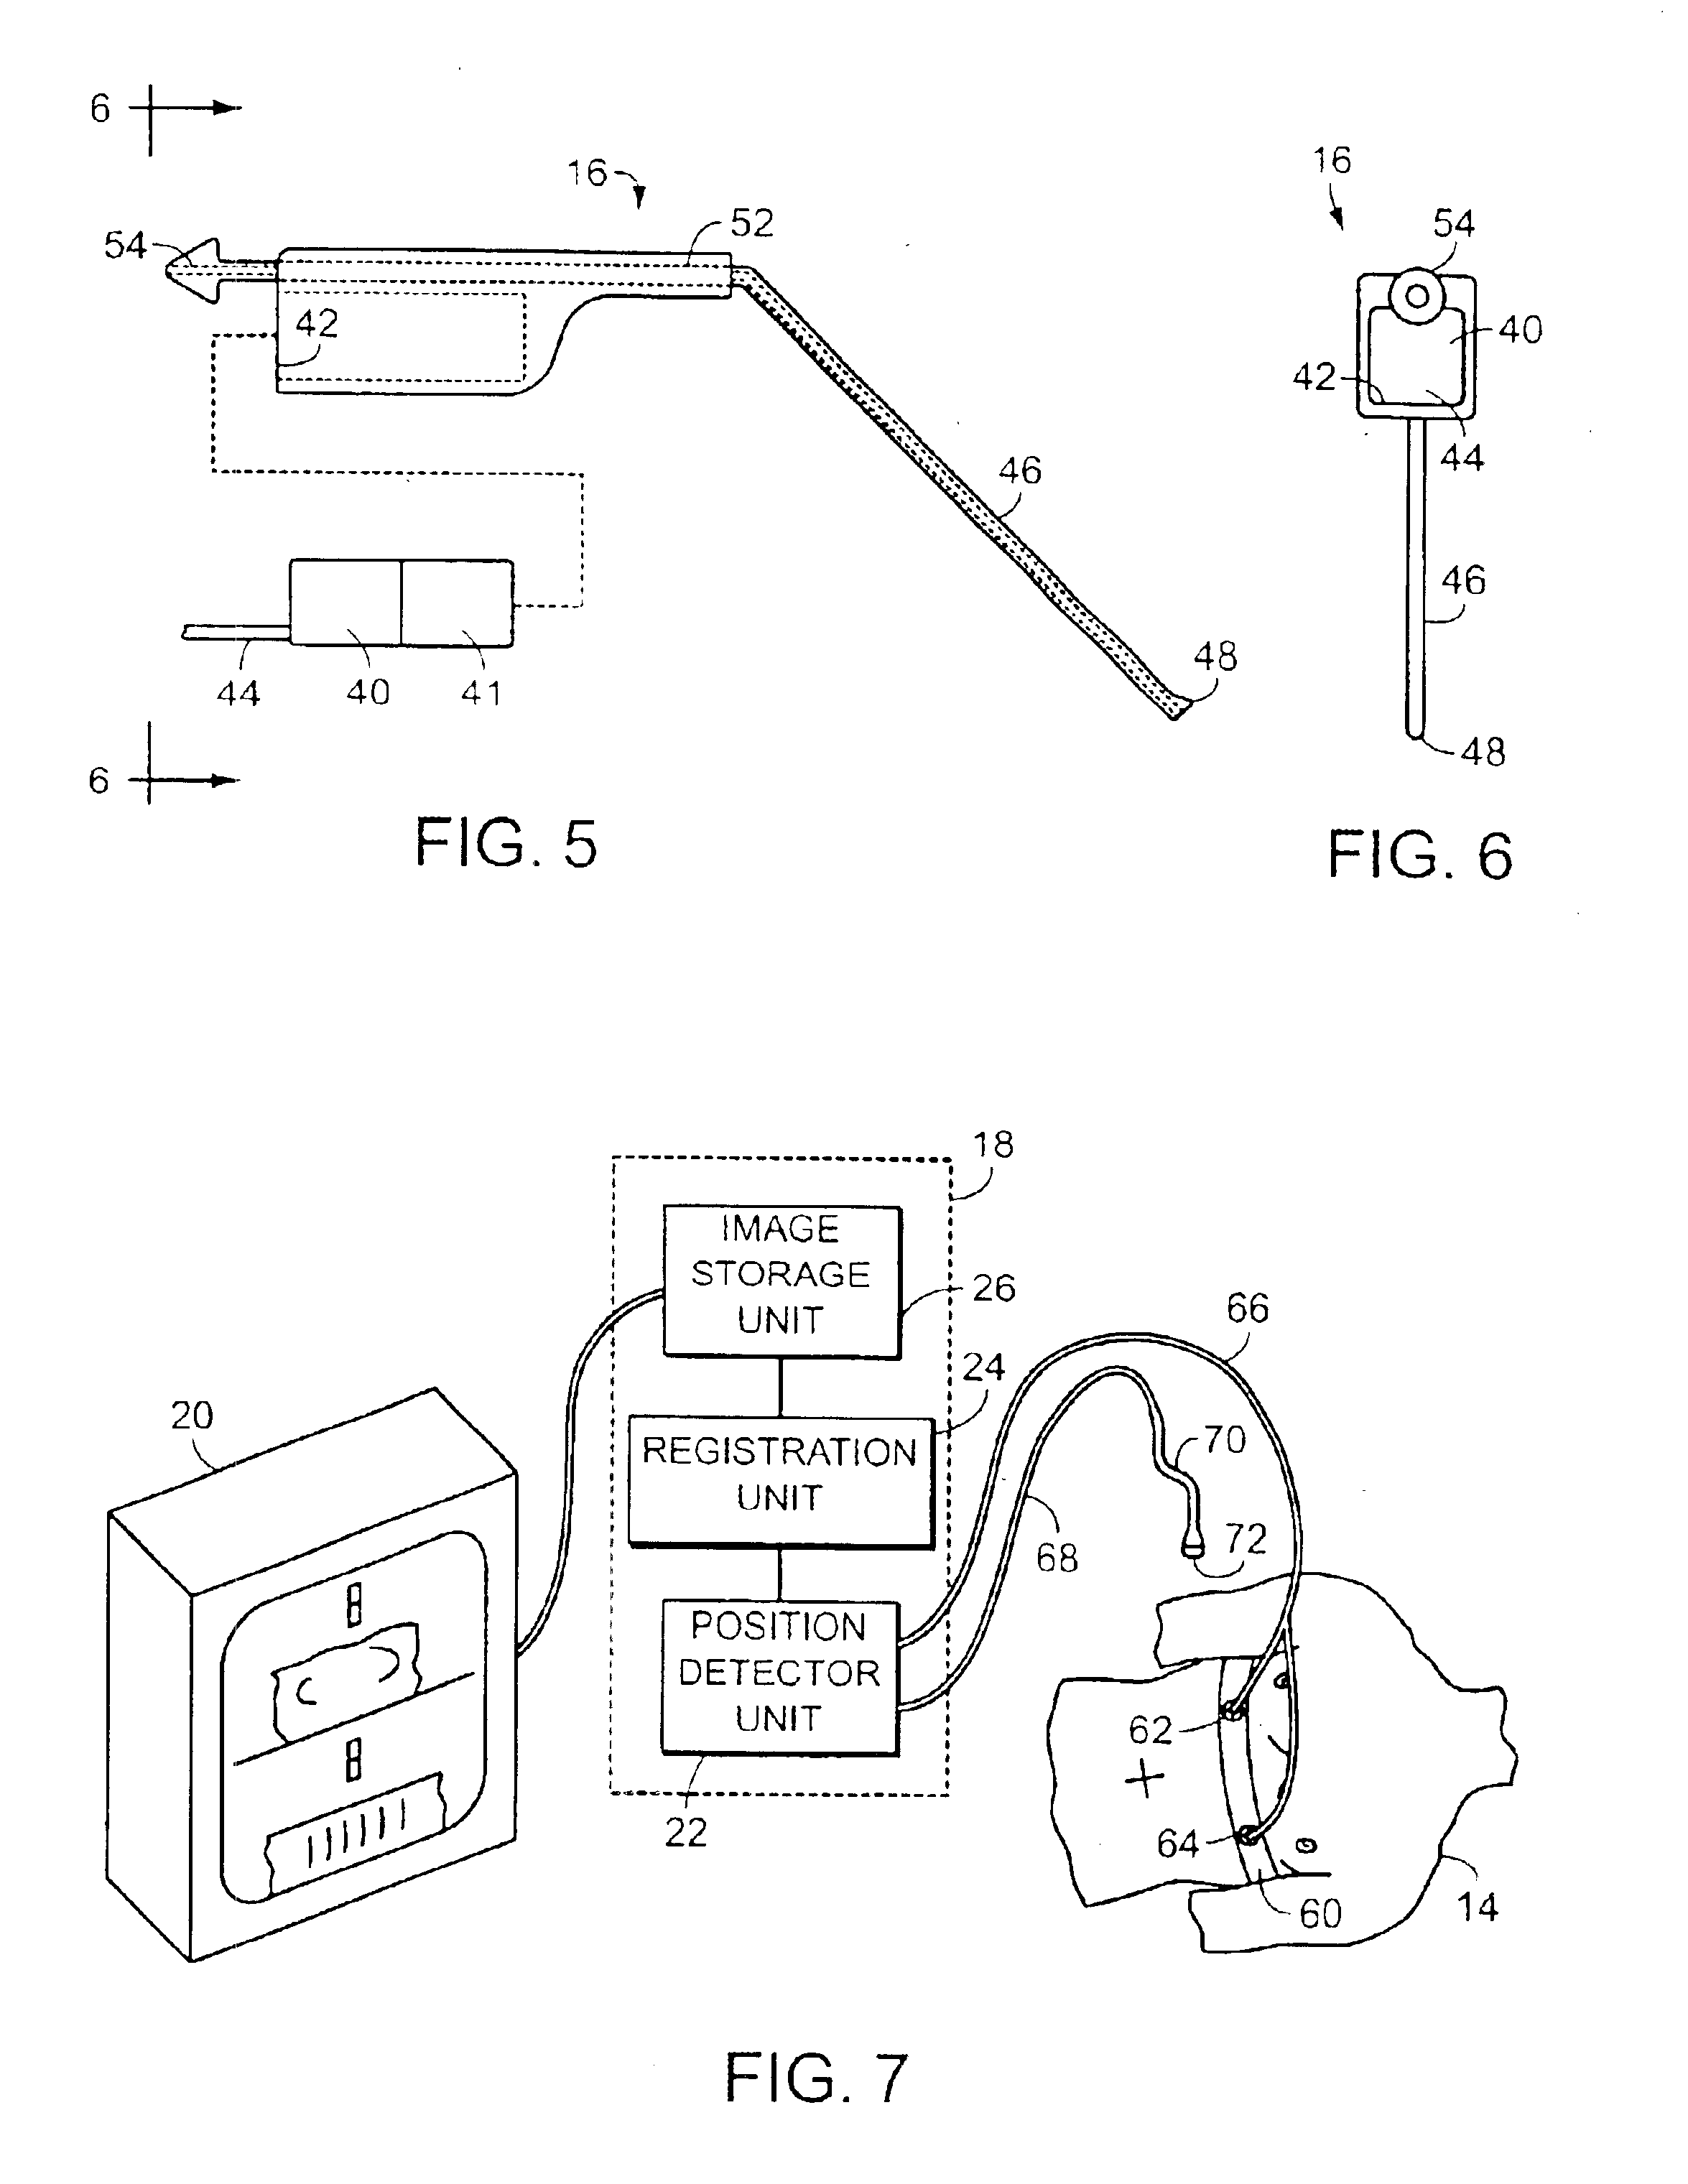 Position tracking and imaging system for use in medical applications